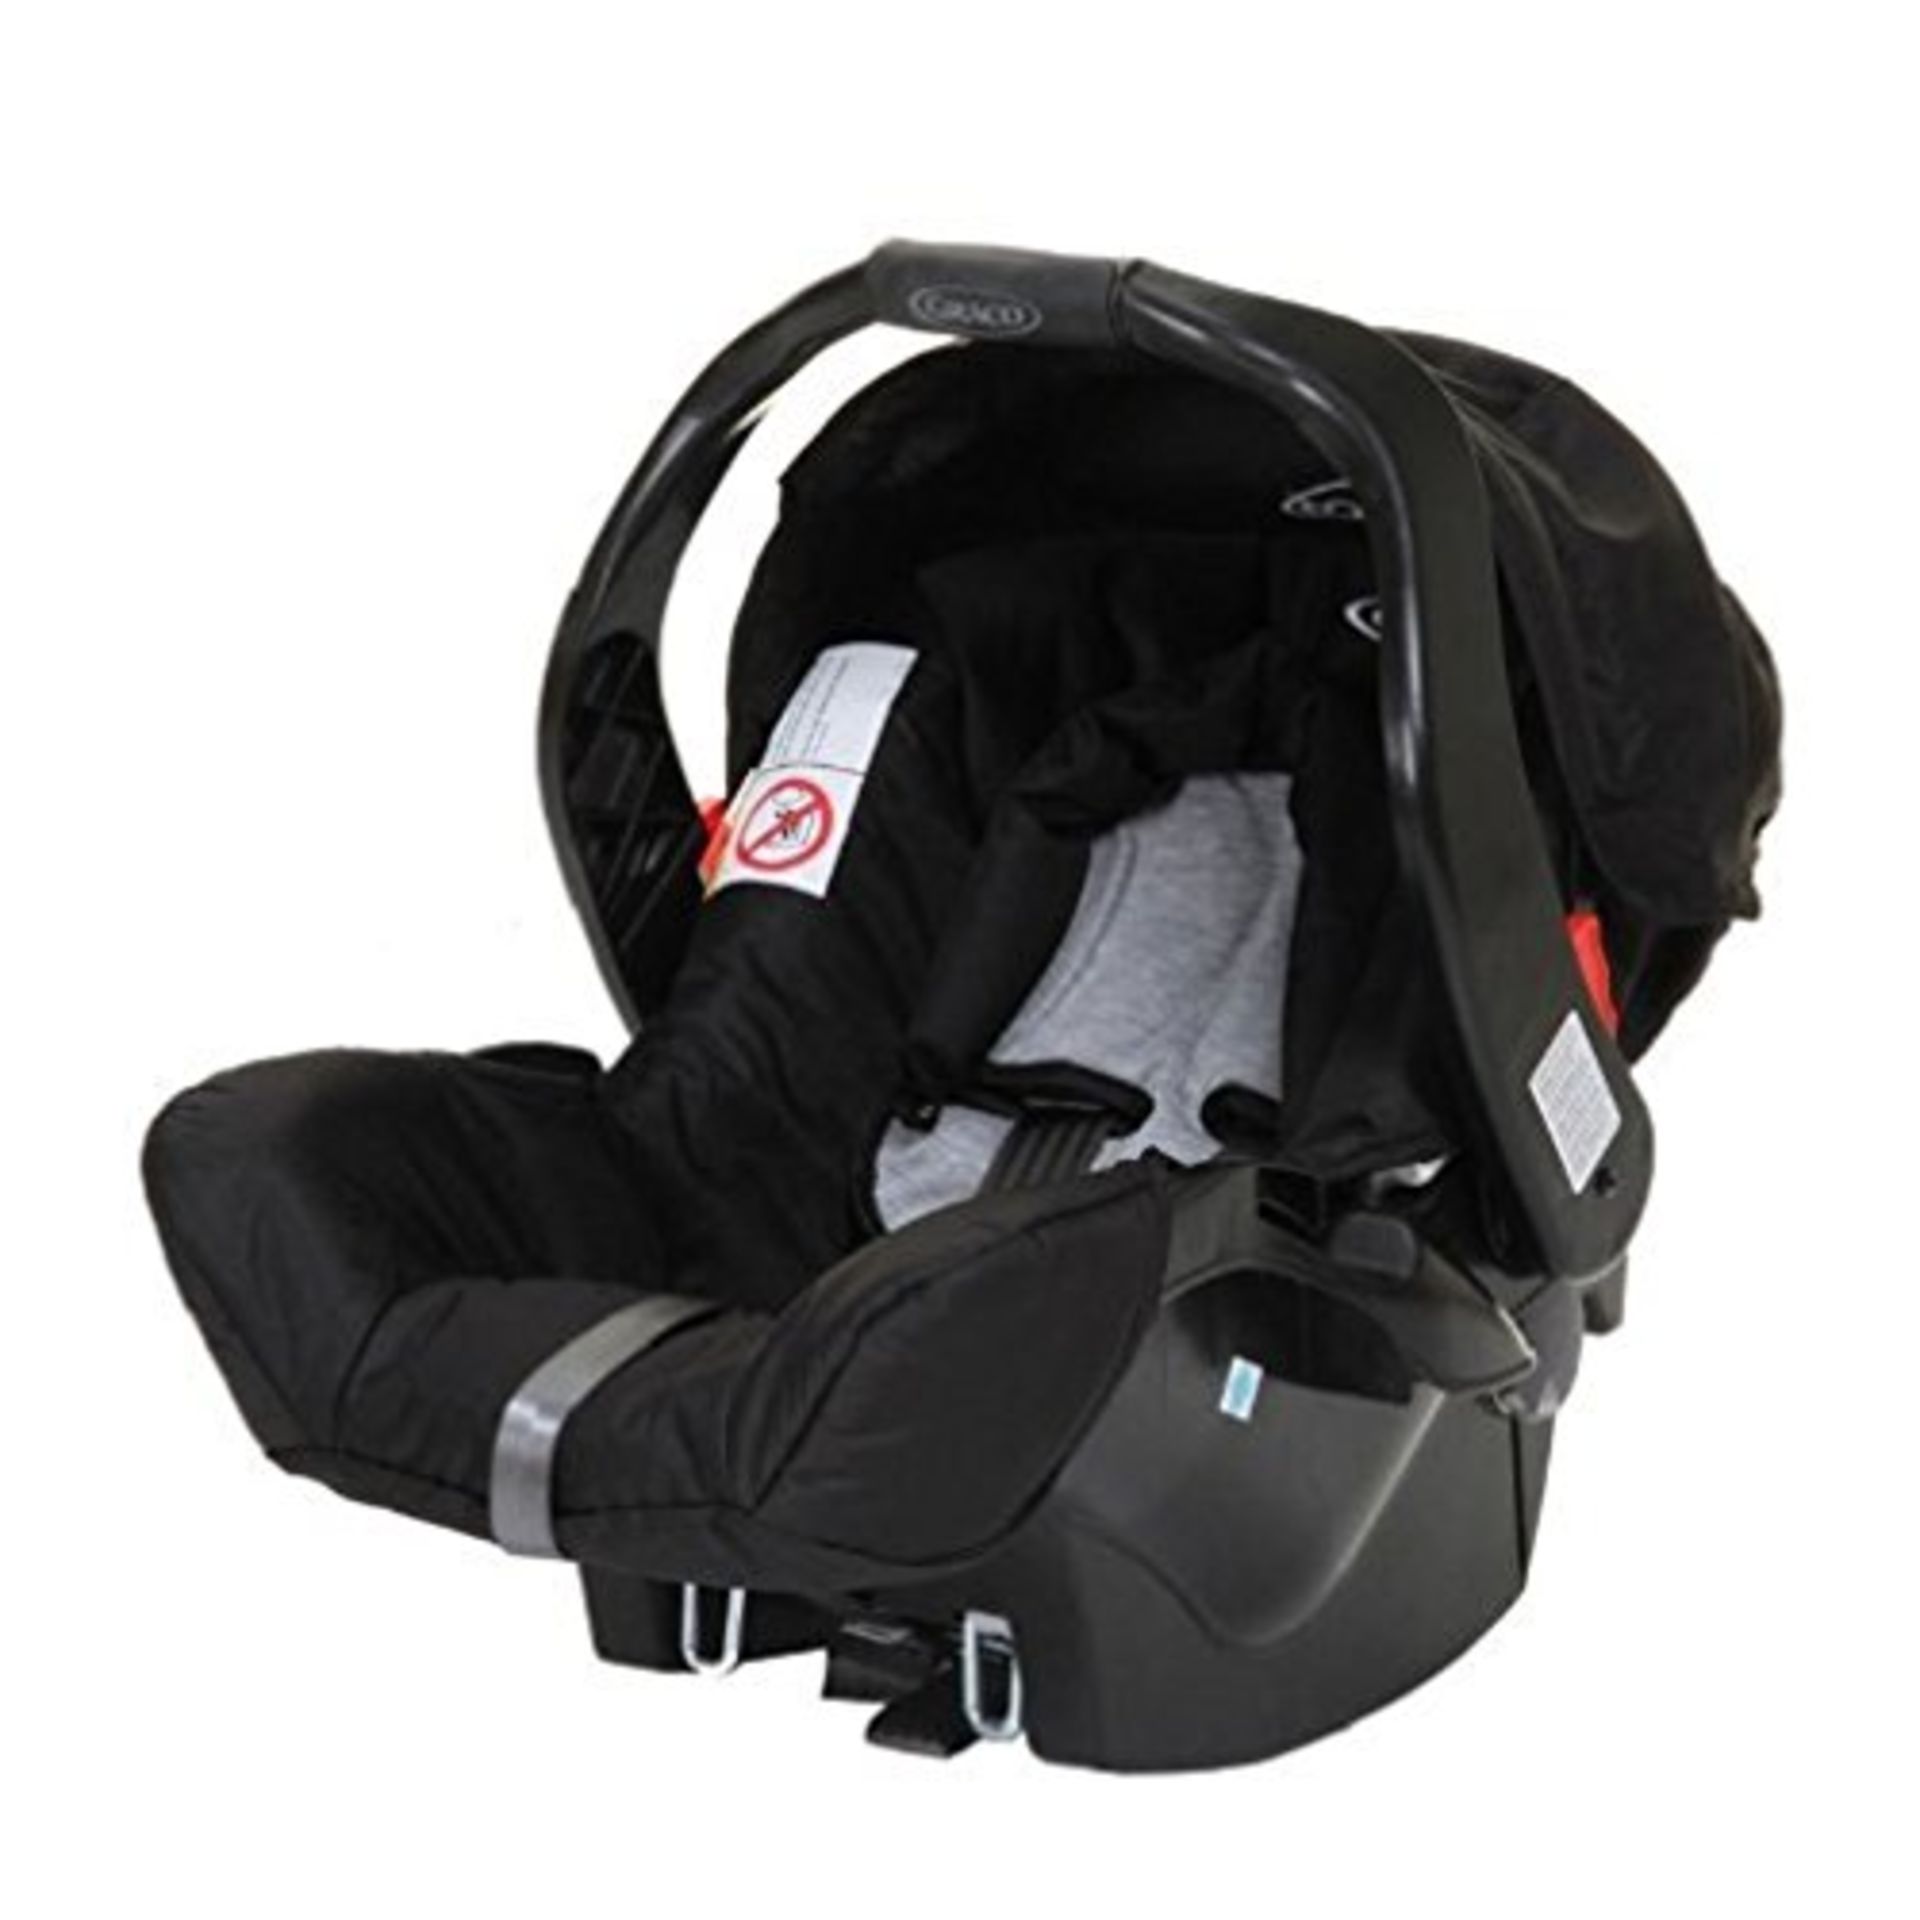 BRAND NEW Graco Junior Baby Group 0+ Car Seat